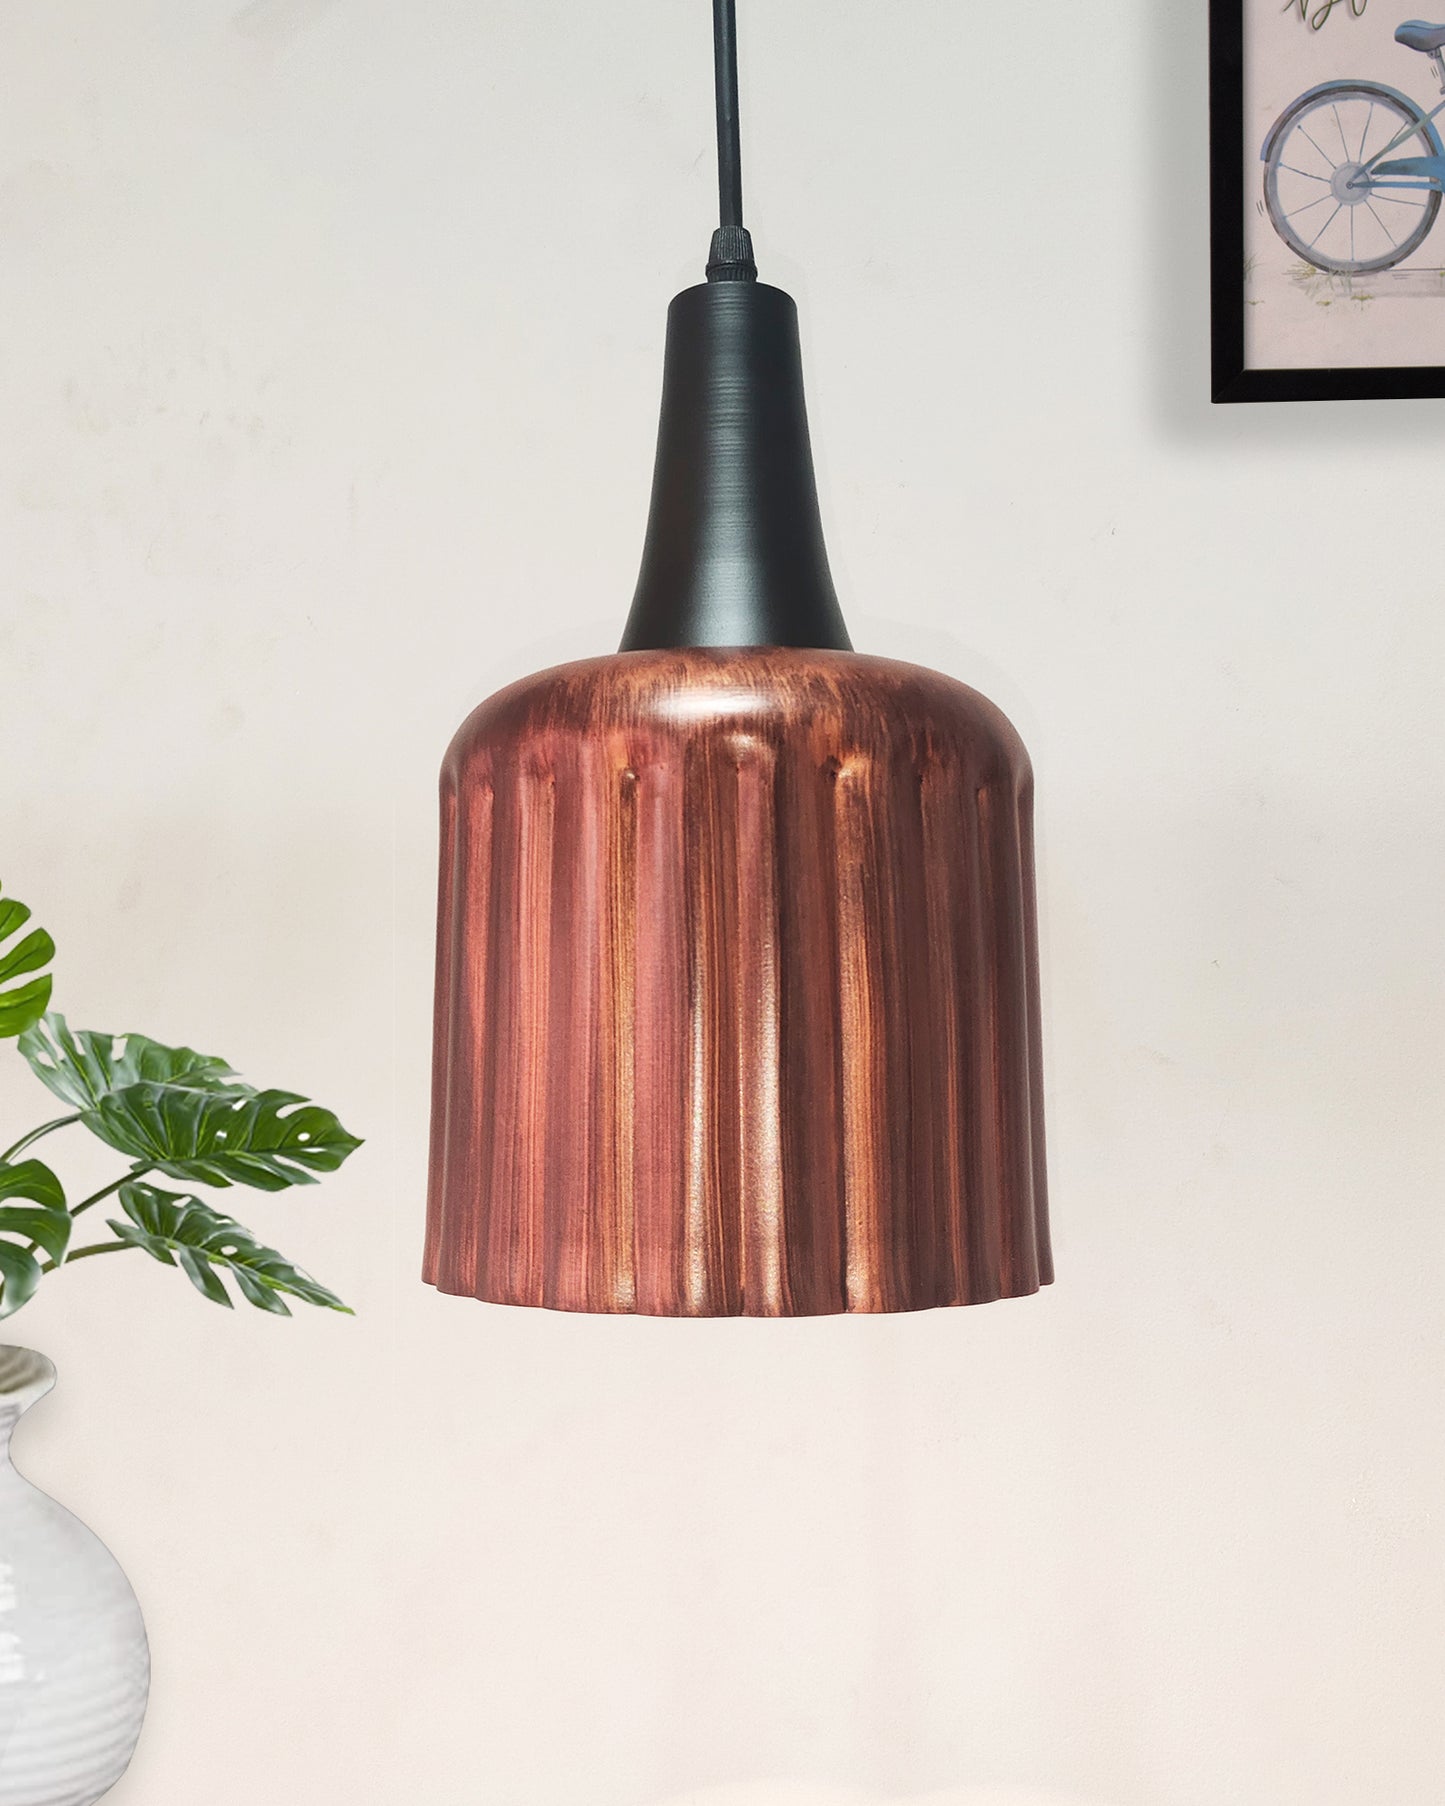 Toned Oil Rubbed Vintage Metal Ceiling Lamp